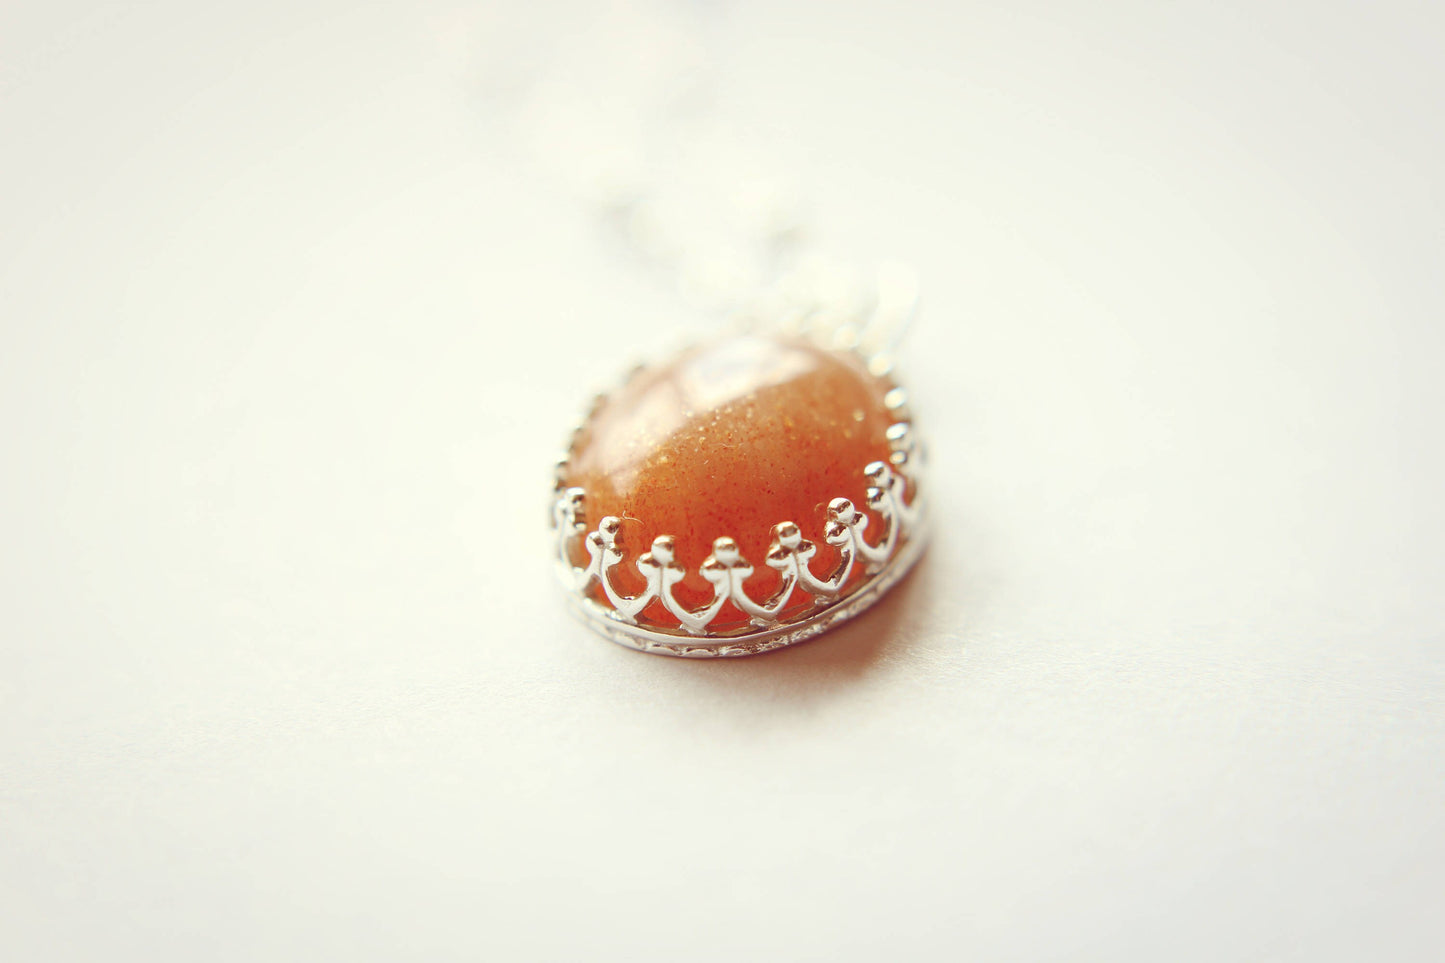 Sunstone Necklace, Victorian Necklace, Necklace, Stone Pendant, Speckled Sunstone Pendant Necklace, Boho Necklace, Layer Necklace, Gift